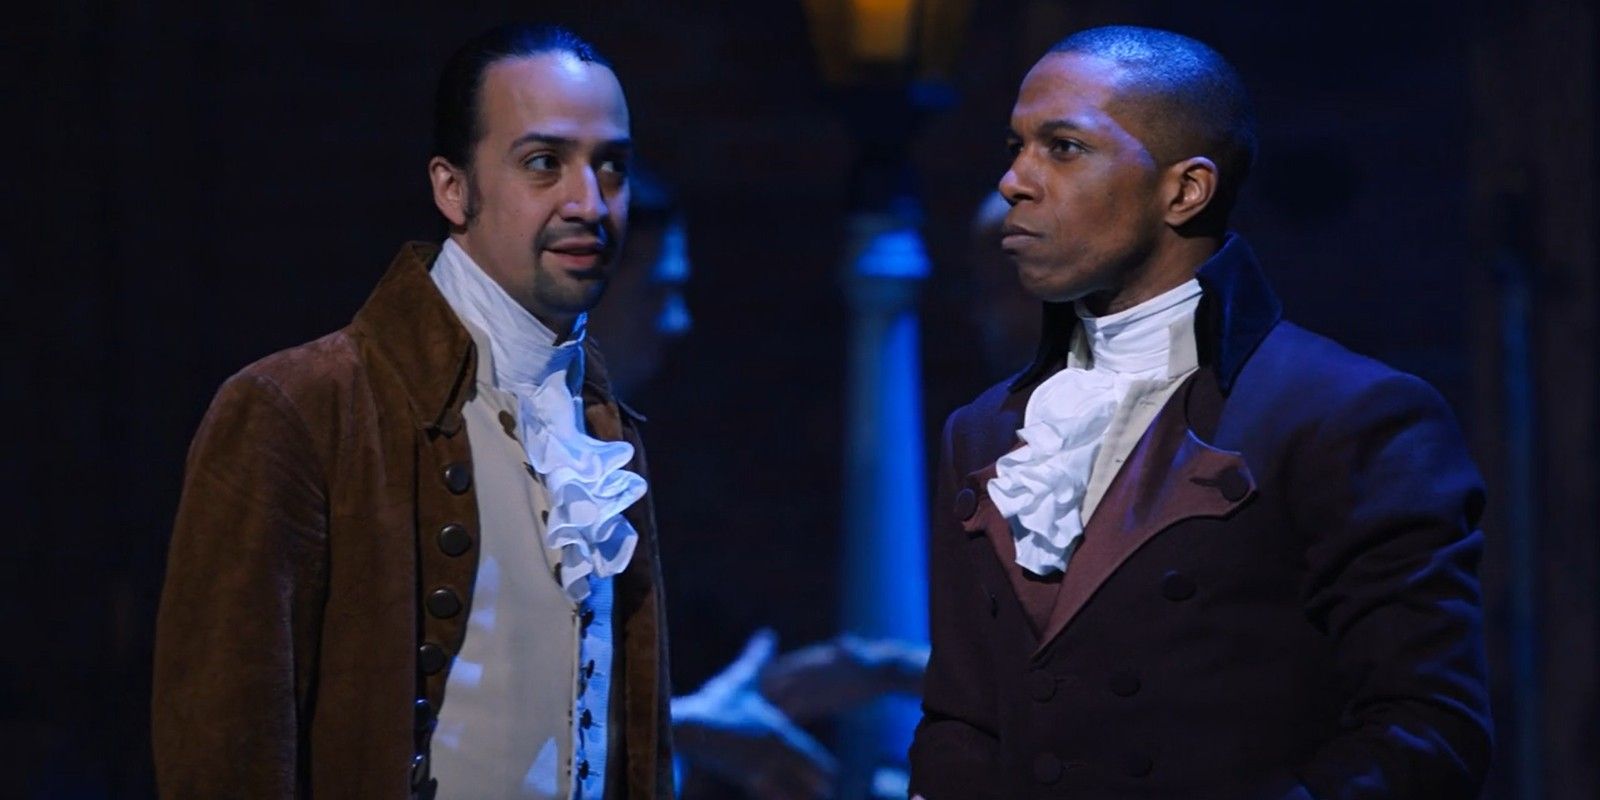 The 10 Best Hamilton Songs From The Broadway Play (Ranked By Spotify